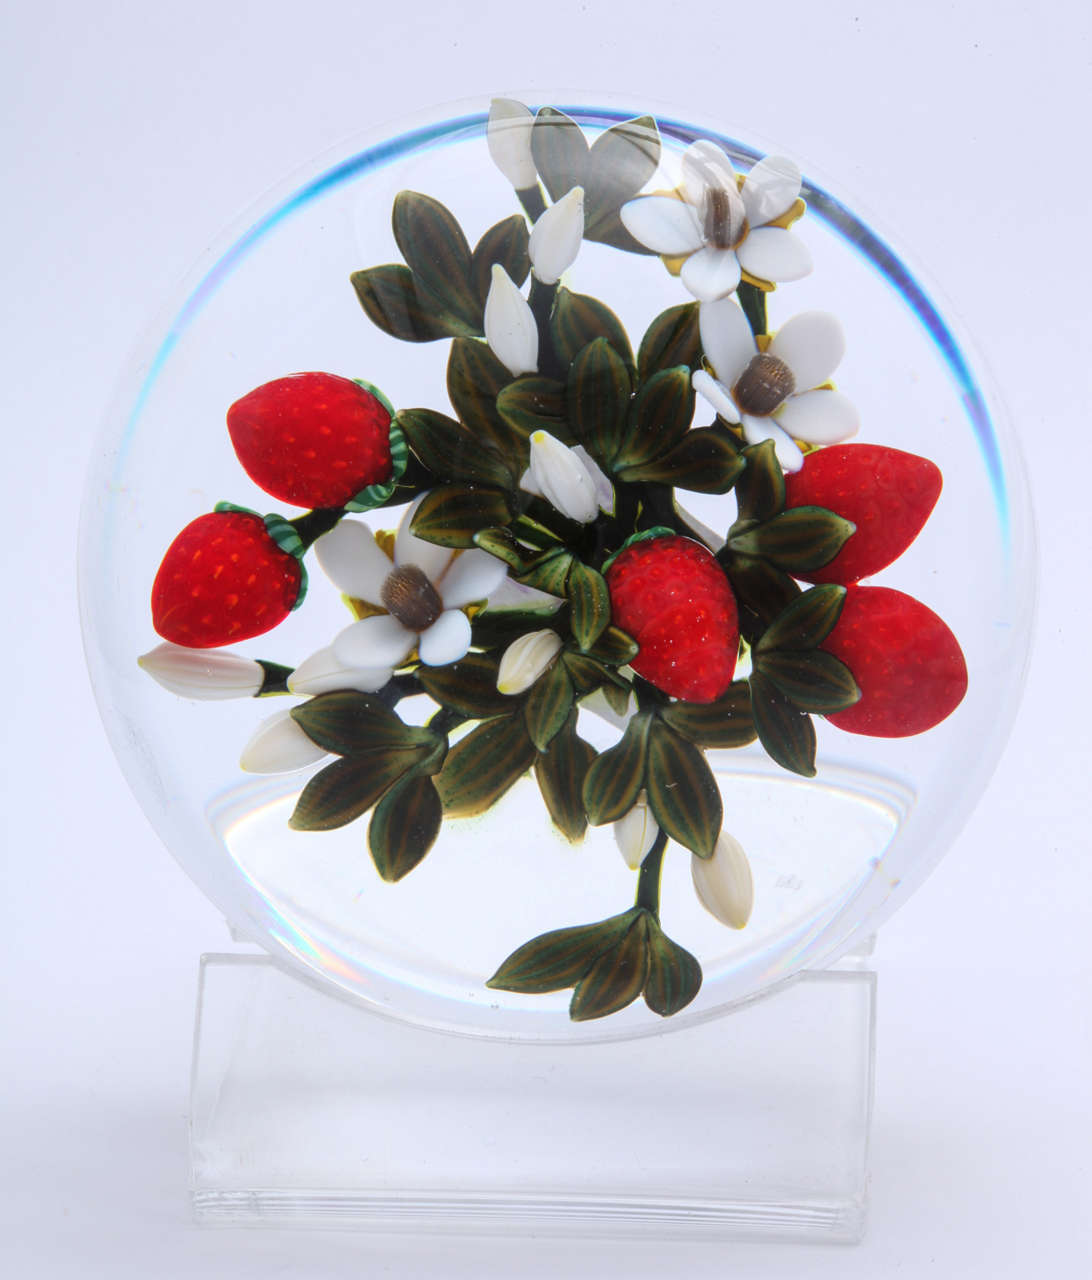 A beautiful Colin Richardson paperweight with five ripe strawberries, blossoms and buds, signed Colin Richardson, 2013, 1/1